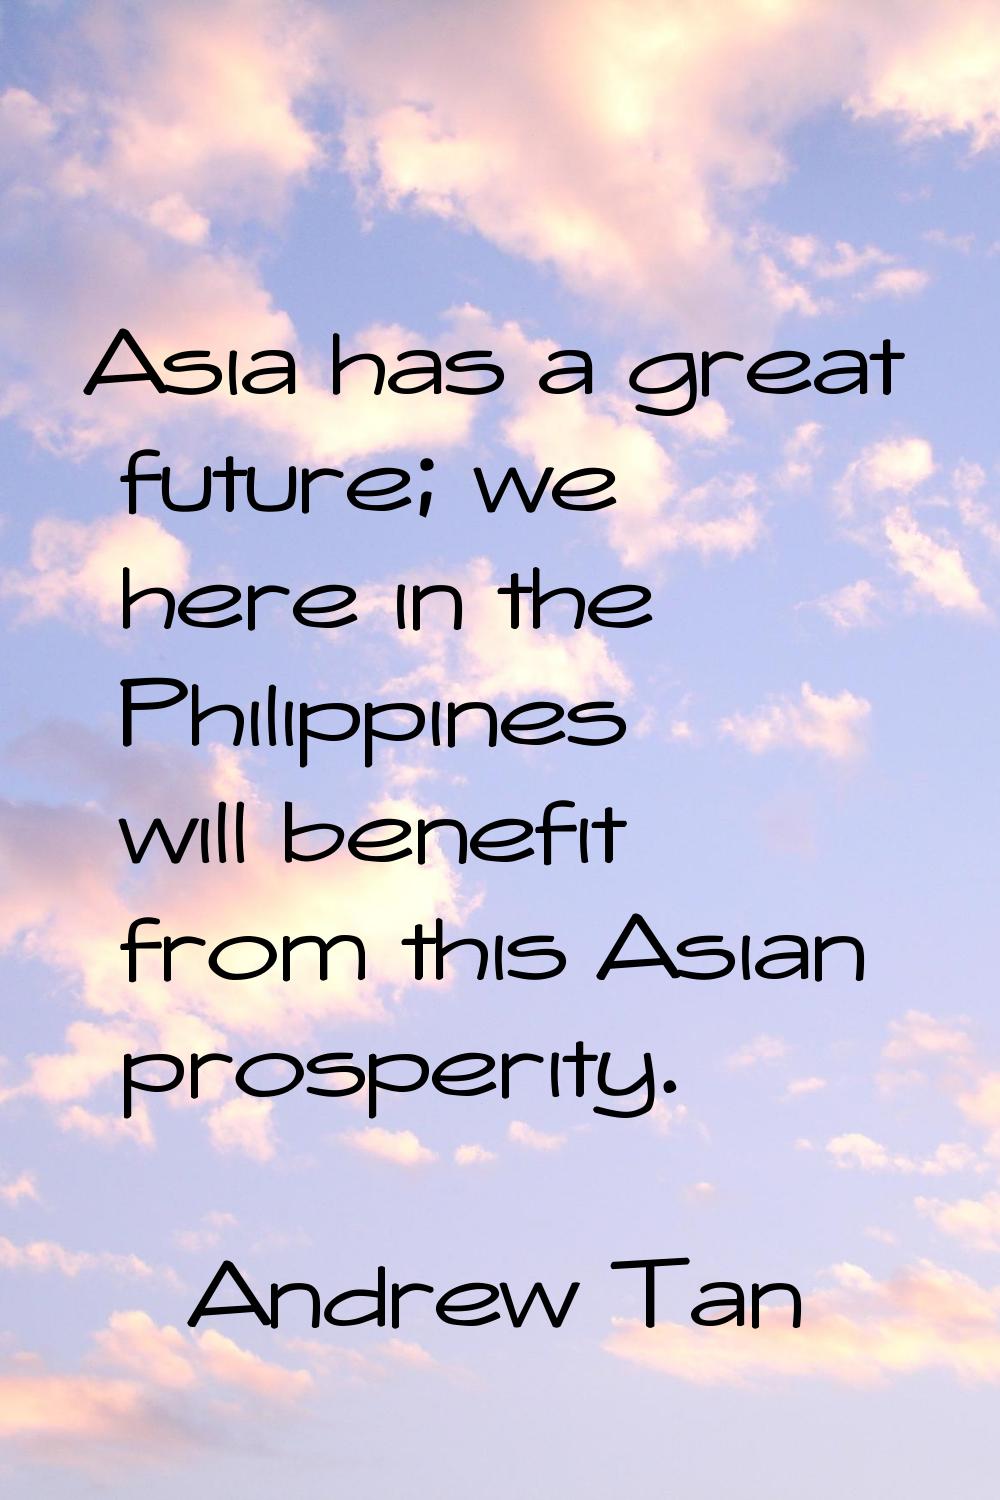 Asia has a great future; we here in the Philippines will benefit from this Asian prosperity.